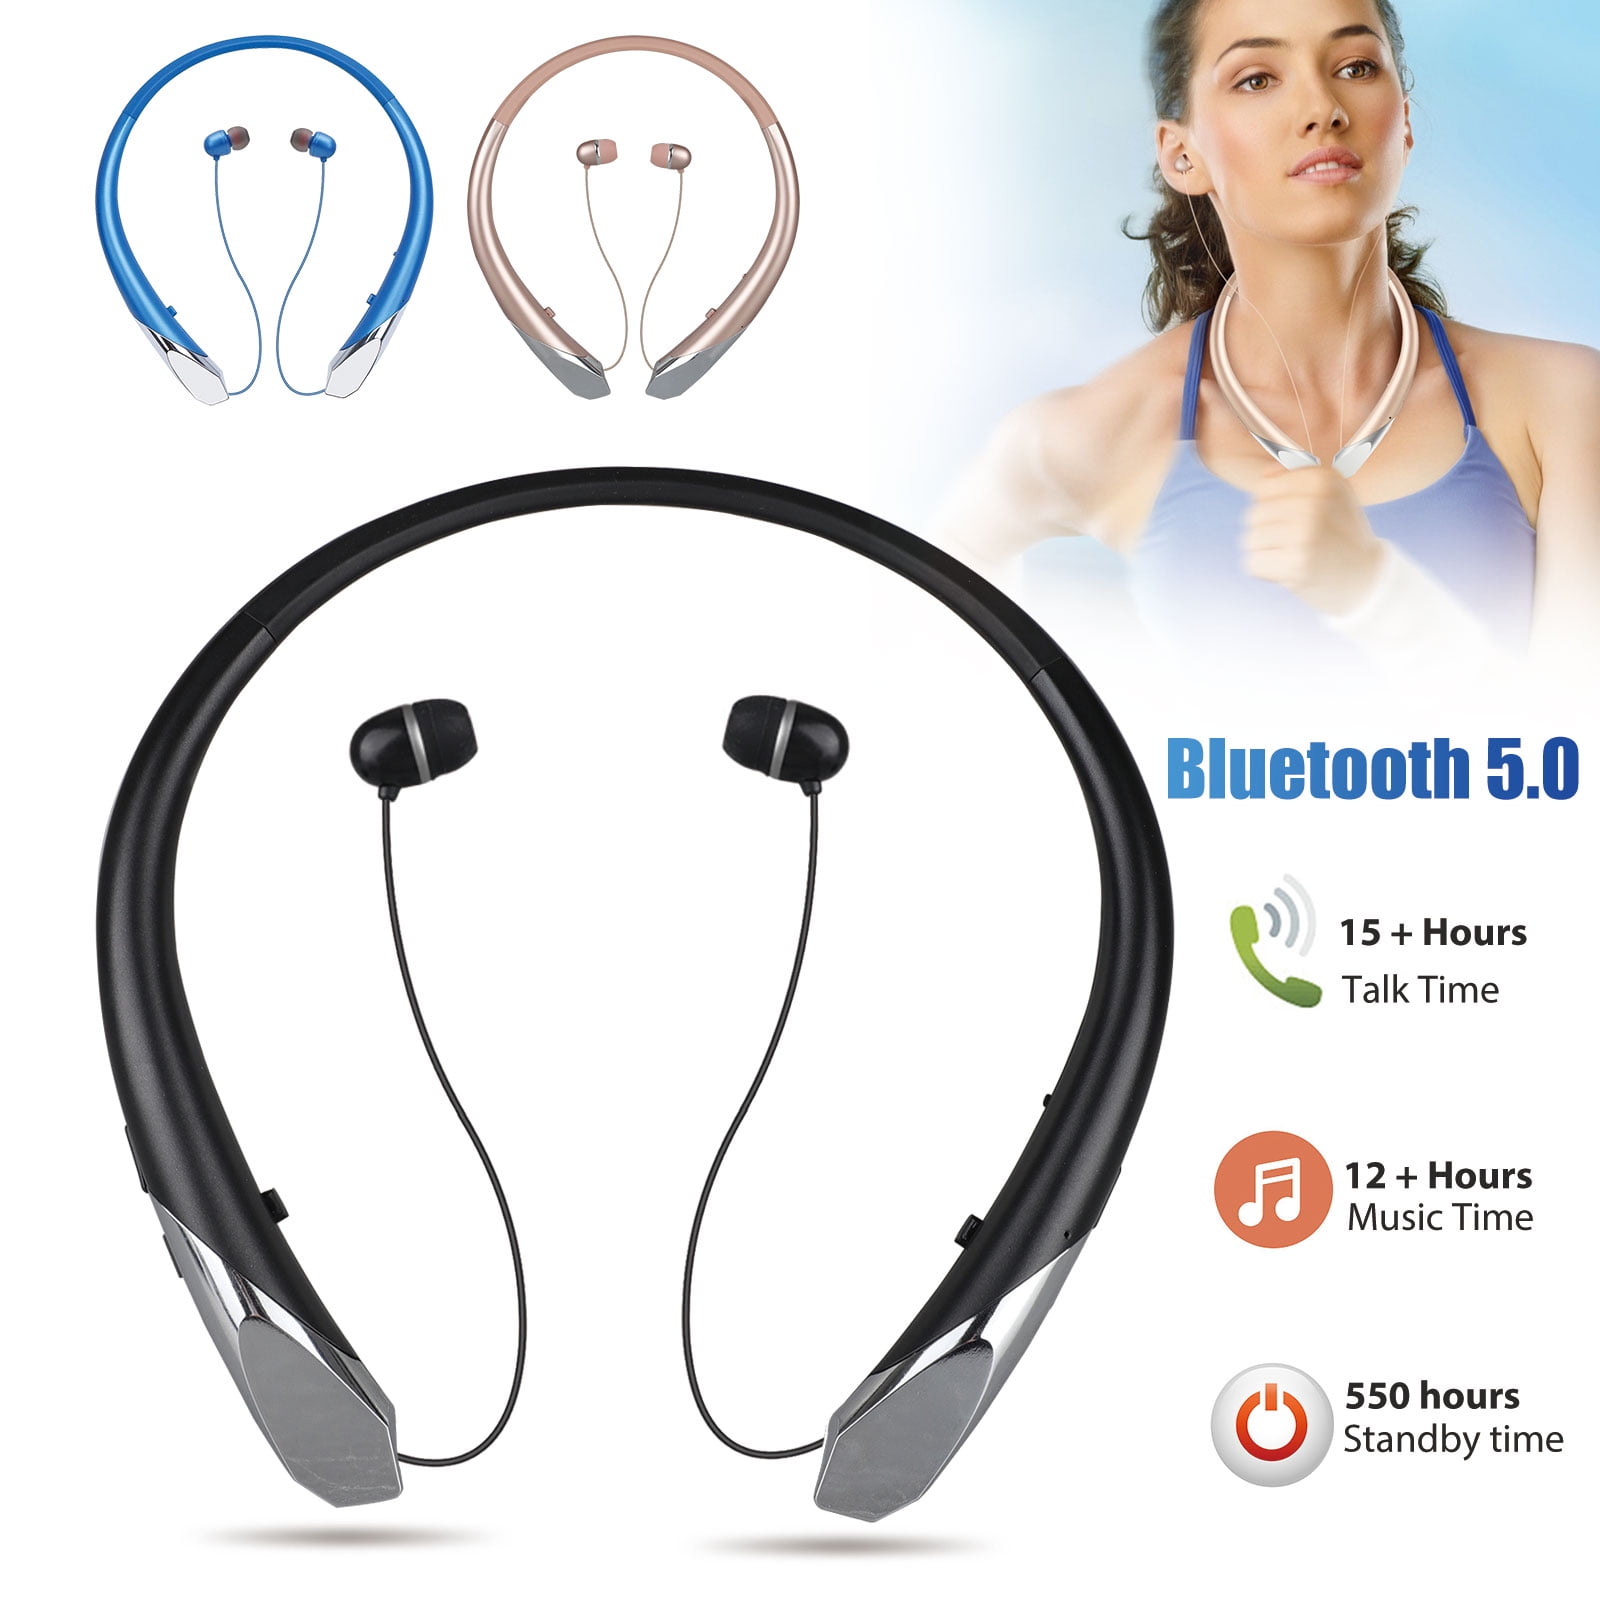 Bluetooth 5.0 Neckband Headphones, Stereo Shocking Bass, Noise Reduction Wireless Bluetooth Headset with HD Mic Auto Retractable Earbuds 12 Hrs Playtime Sports Earphones for Gym Running Traving, Gift